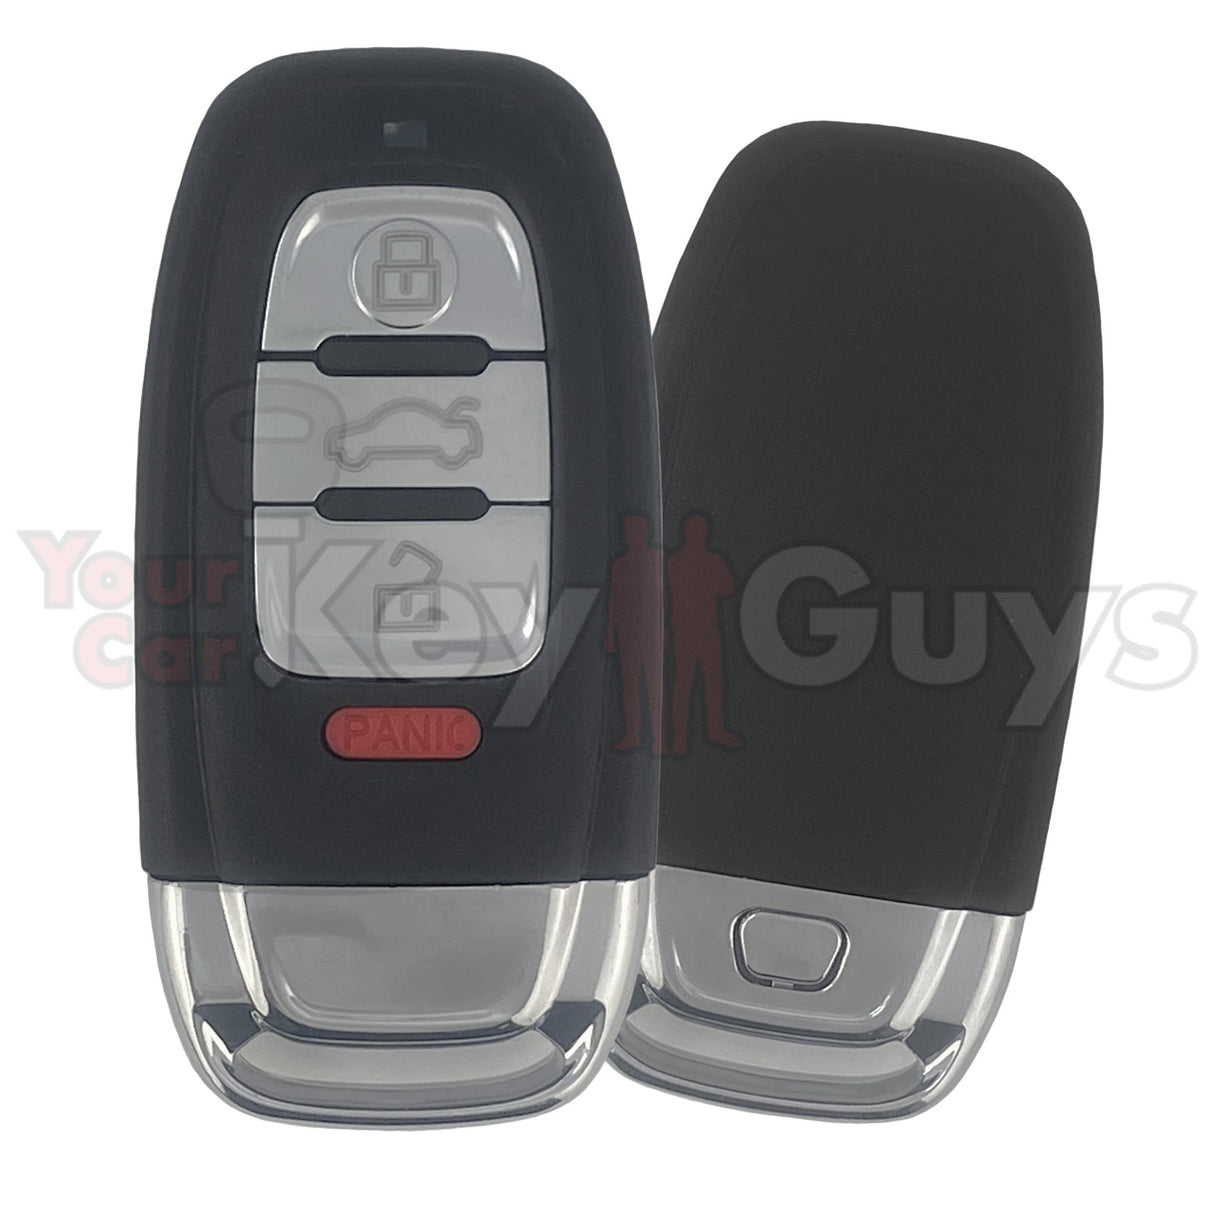 SHELL Replacement for Audi Smart Slot Keys